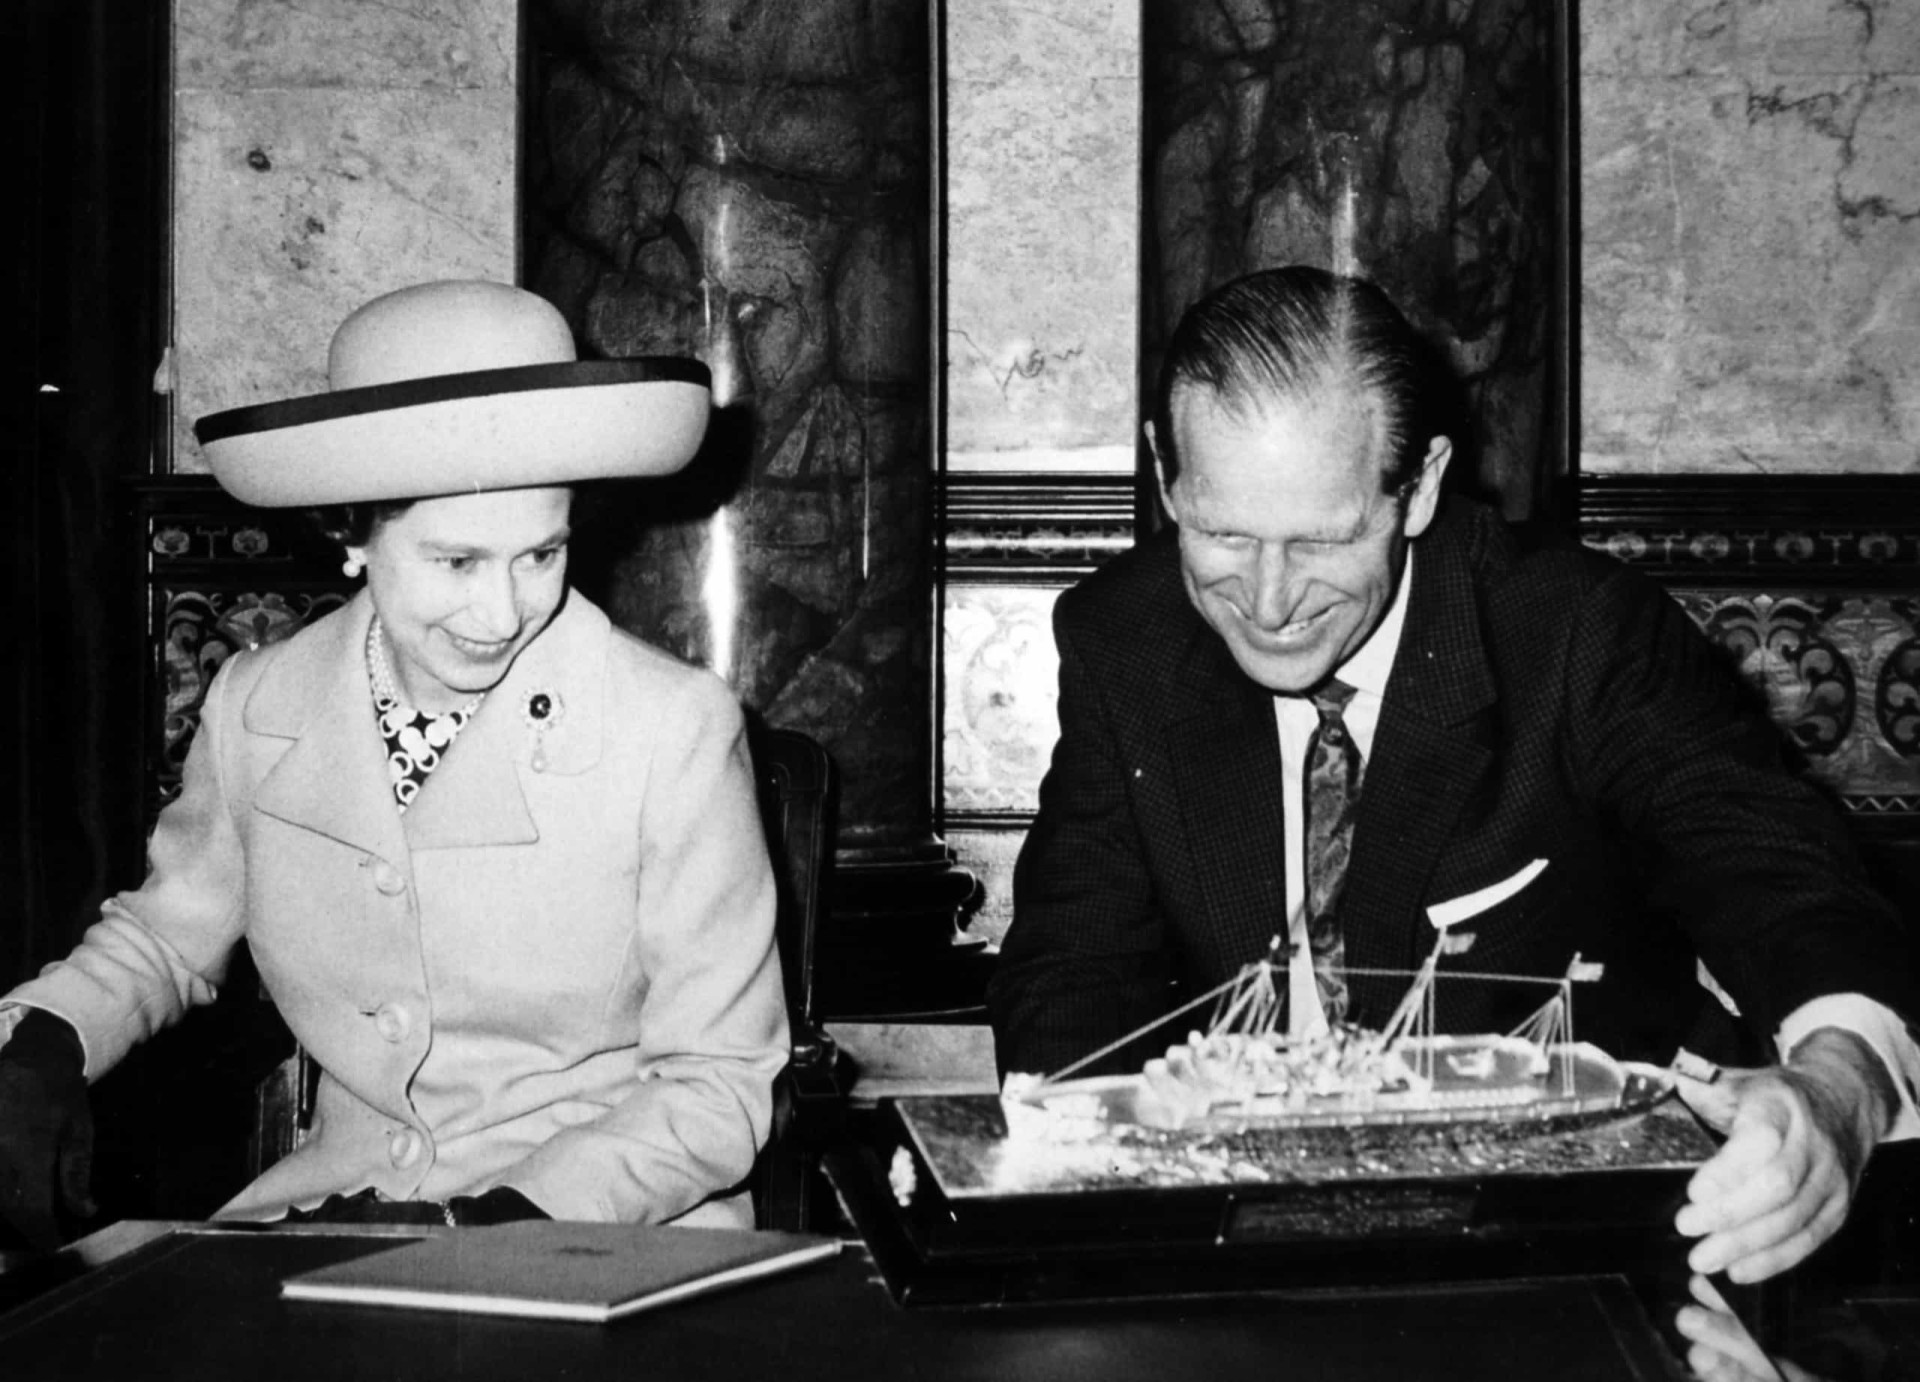 <p>Queen Elizabeth II and the Duke of Edinburgh admire a gift received after the monarch opened the new accommodation of Lloyd's Register of Shipping at the society's City of London headquarters. The gift was a silver model replica of the Royal Yacht <em>Britannia</em>.</p><p>You may also like:<a href="https://www.starsinsider.com/n/339710?utm_source=msn.com&utm_medium=display&utm_campaign=referral_description&utm_content=474709v1en-us"> Bugshots: insects as you've never seen them before!</a></p>